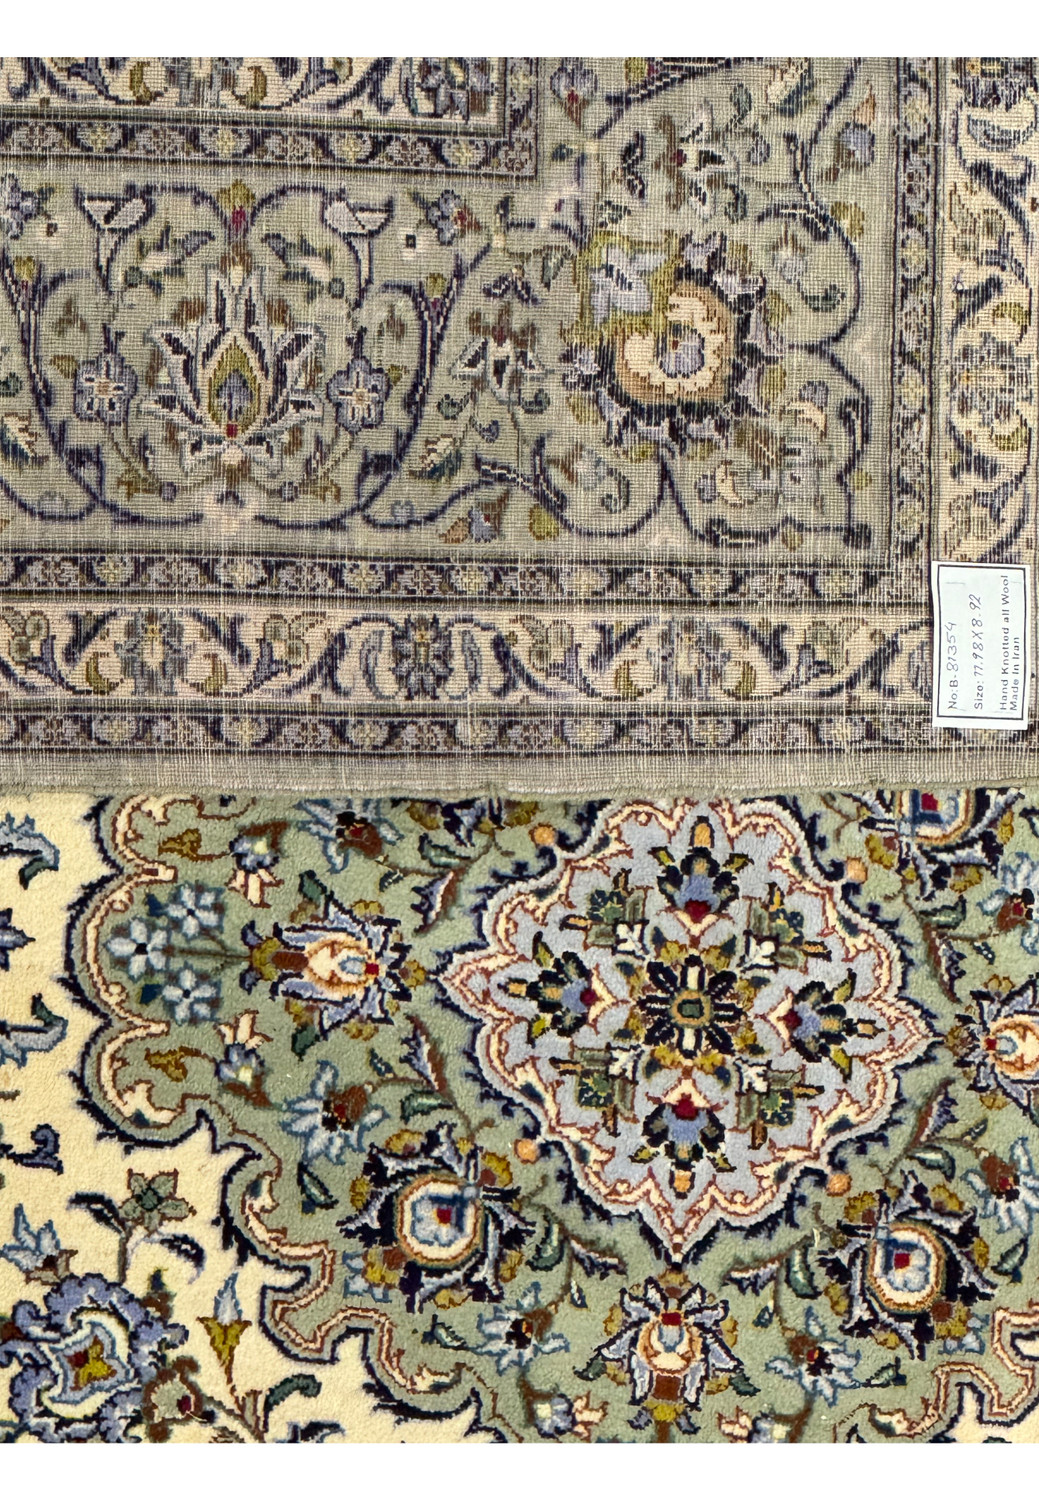 The back of the a 9x12 Persian Ivory Kashan Rug showcasing the weaving artistry.